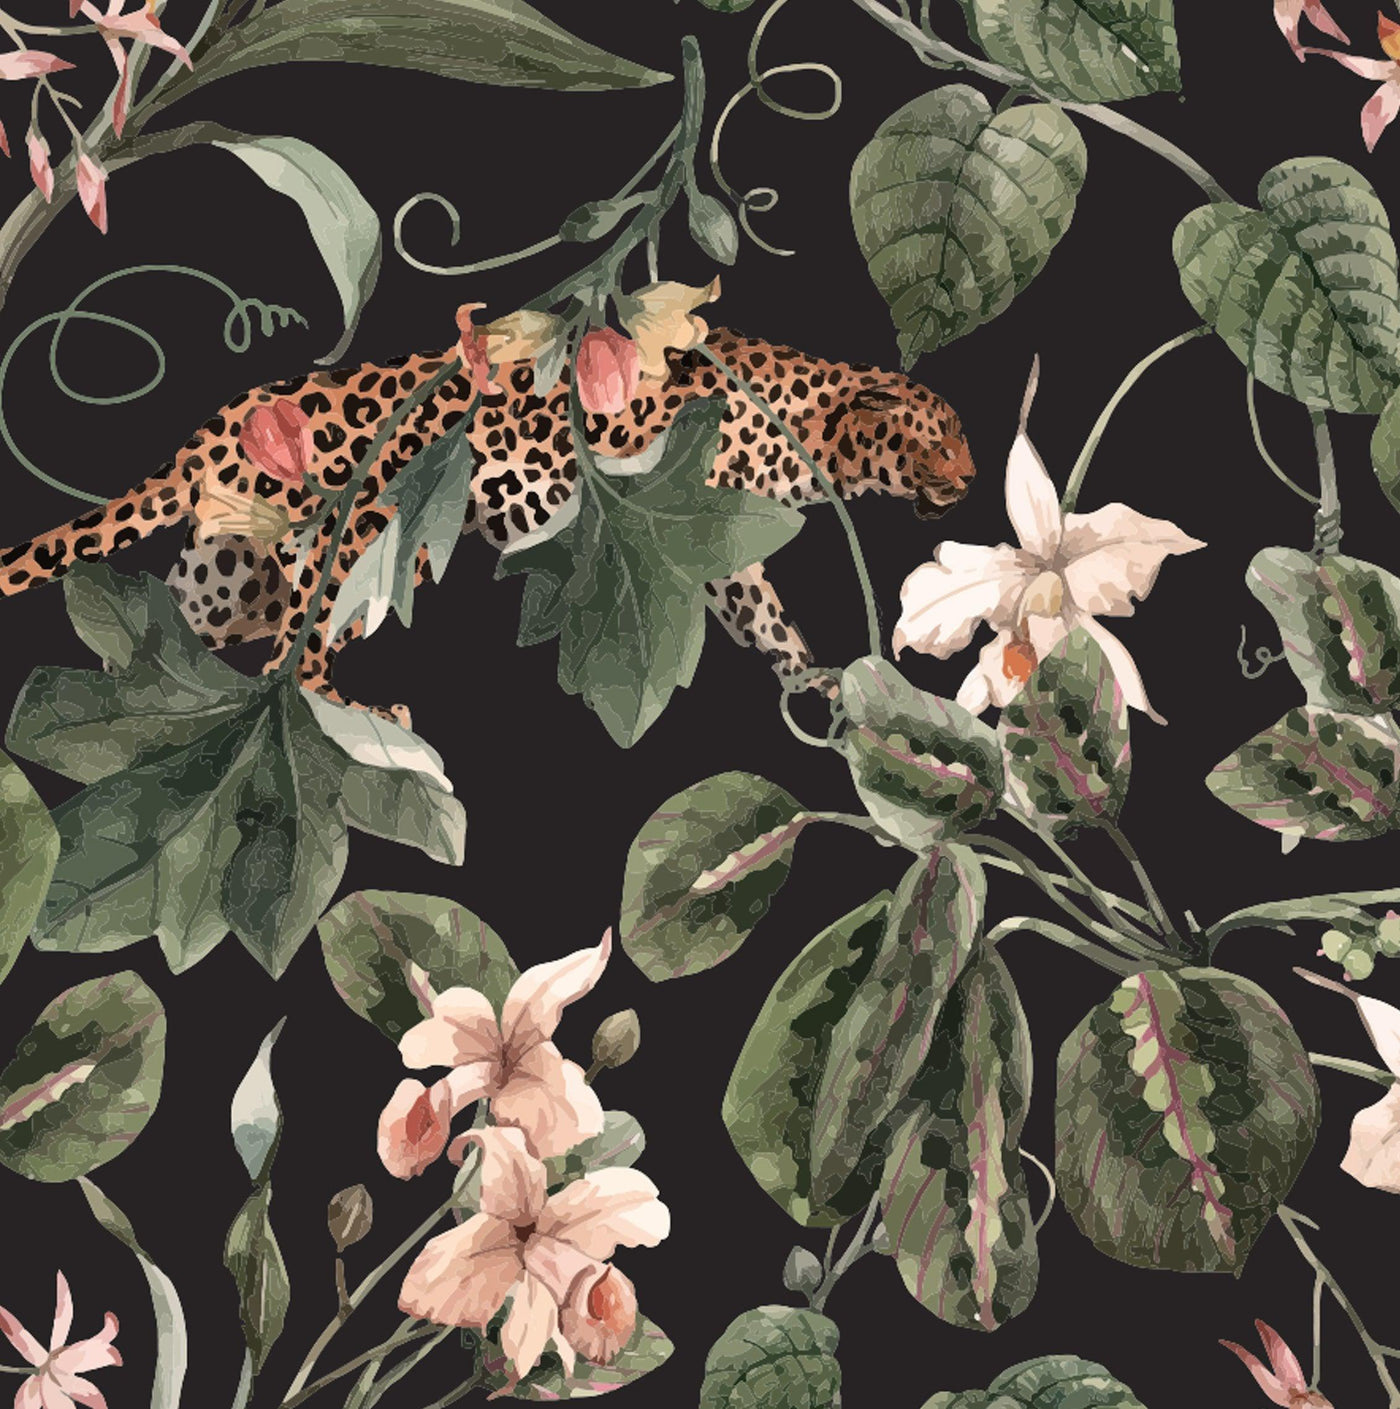 Wilderness and Flowers Mural Wallpaper (m²)-Wall Decor-ANIMALS WALLPAPER, FLORAL WALLPAPERS, LEAF WALLPAPER, MURALS, MURALS / WALLPAPERS, NATURE WALL ART, NON-WOVEN WALLPAPER, TROPICAL WALLPAPERS-Forest Homes-Nature inspired decor-Nature decor